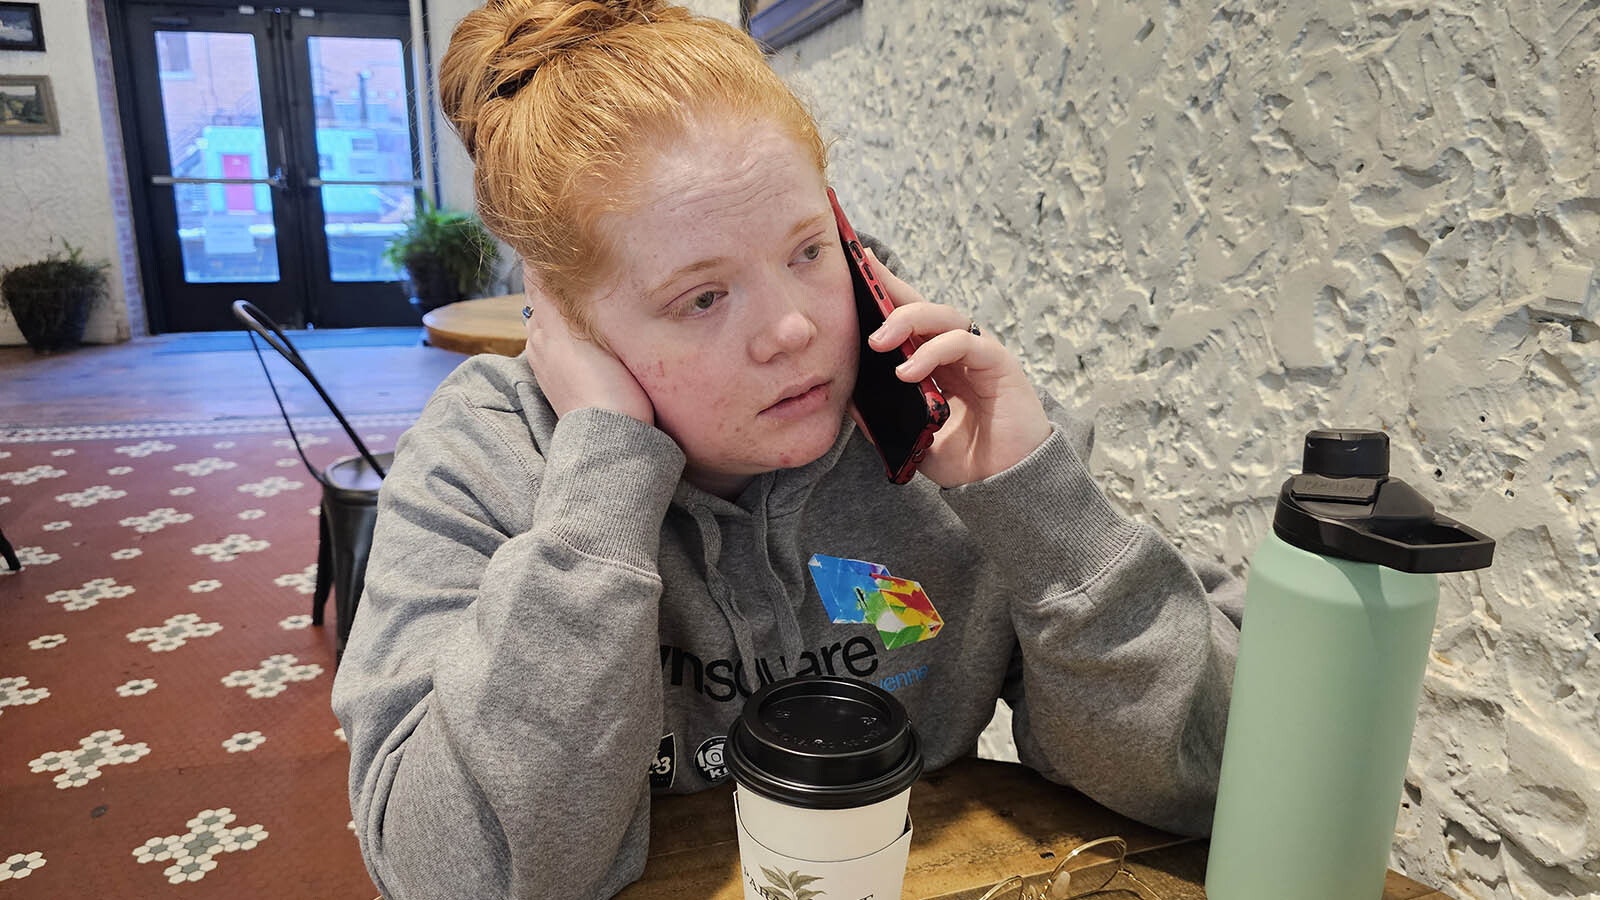 Phylicia Peterson talks with Cheyenne city officials on her smartphone Monday morning about the damage to her home, which was inundated with flood waters after a 12-inch city water main busted last week.